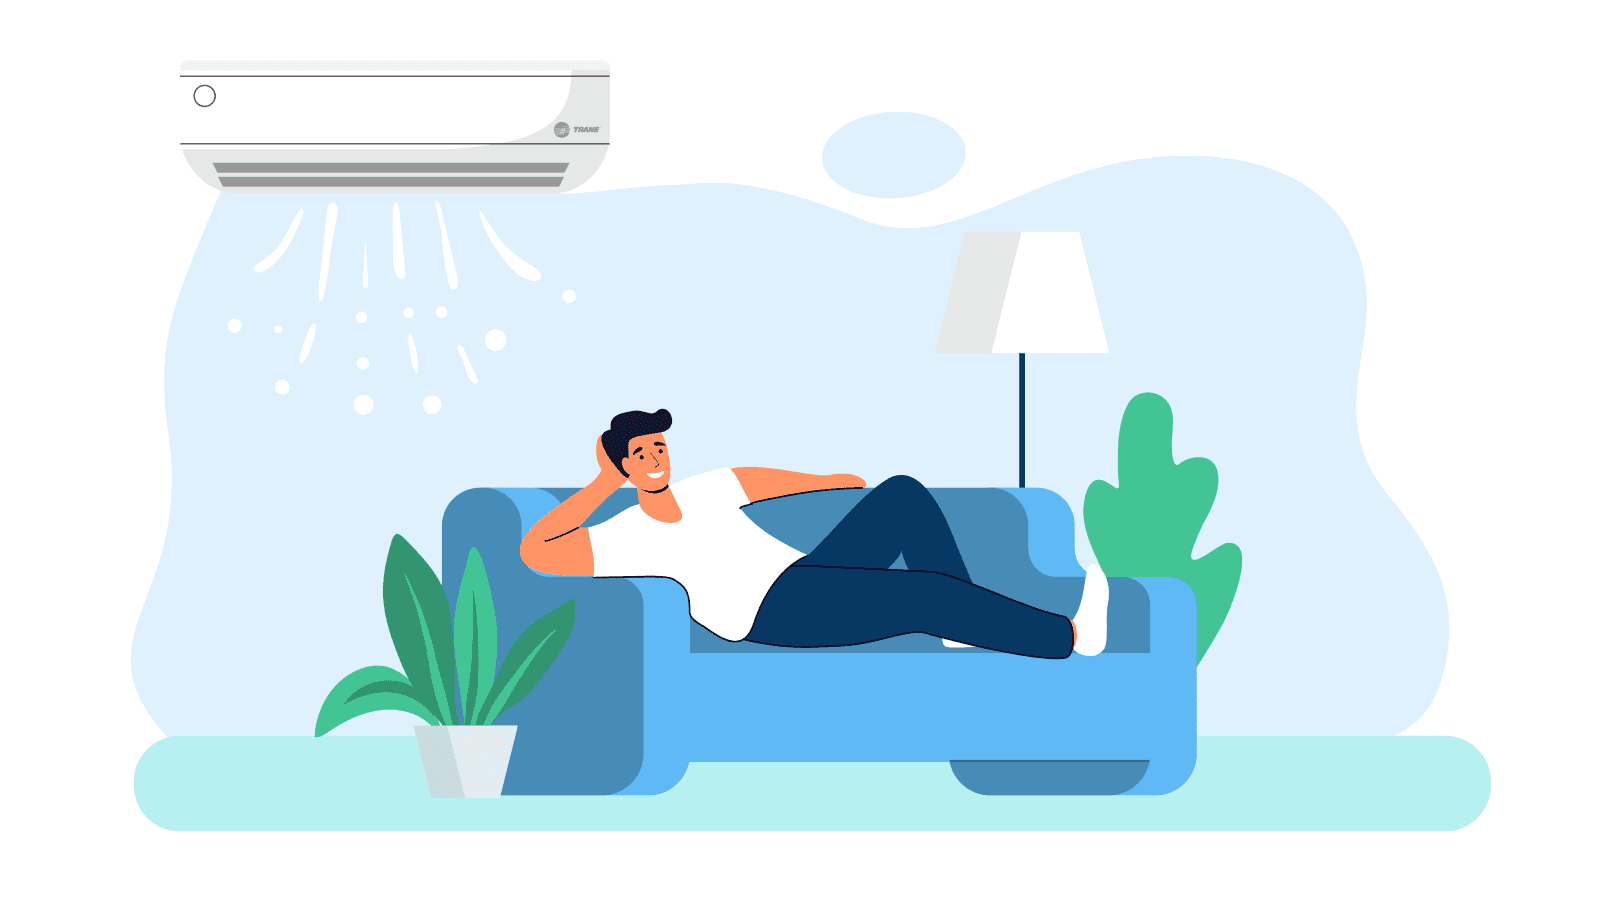 An illustration depicting a man sitting on a sofa with a ductless air conditioning unit delivering cool air to the room.